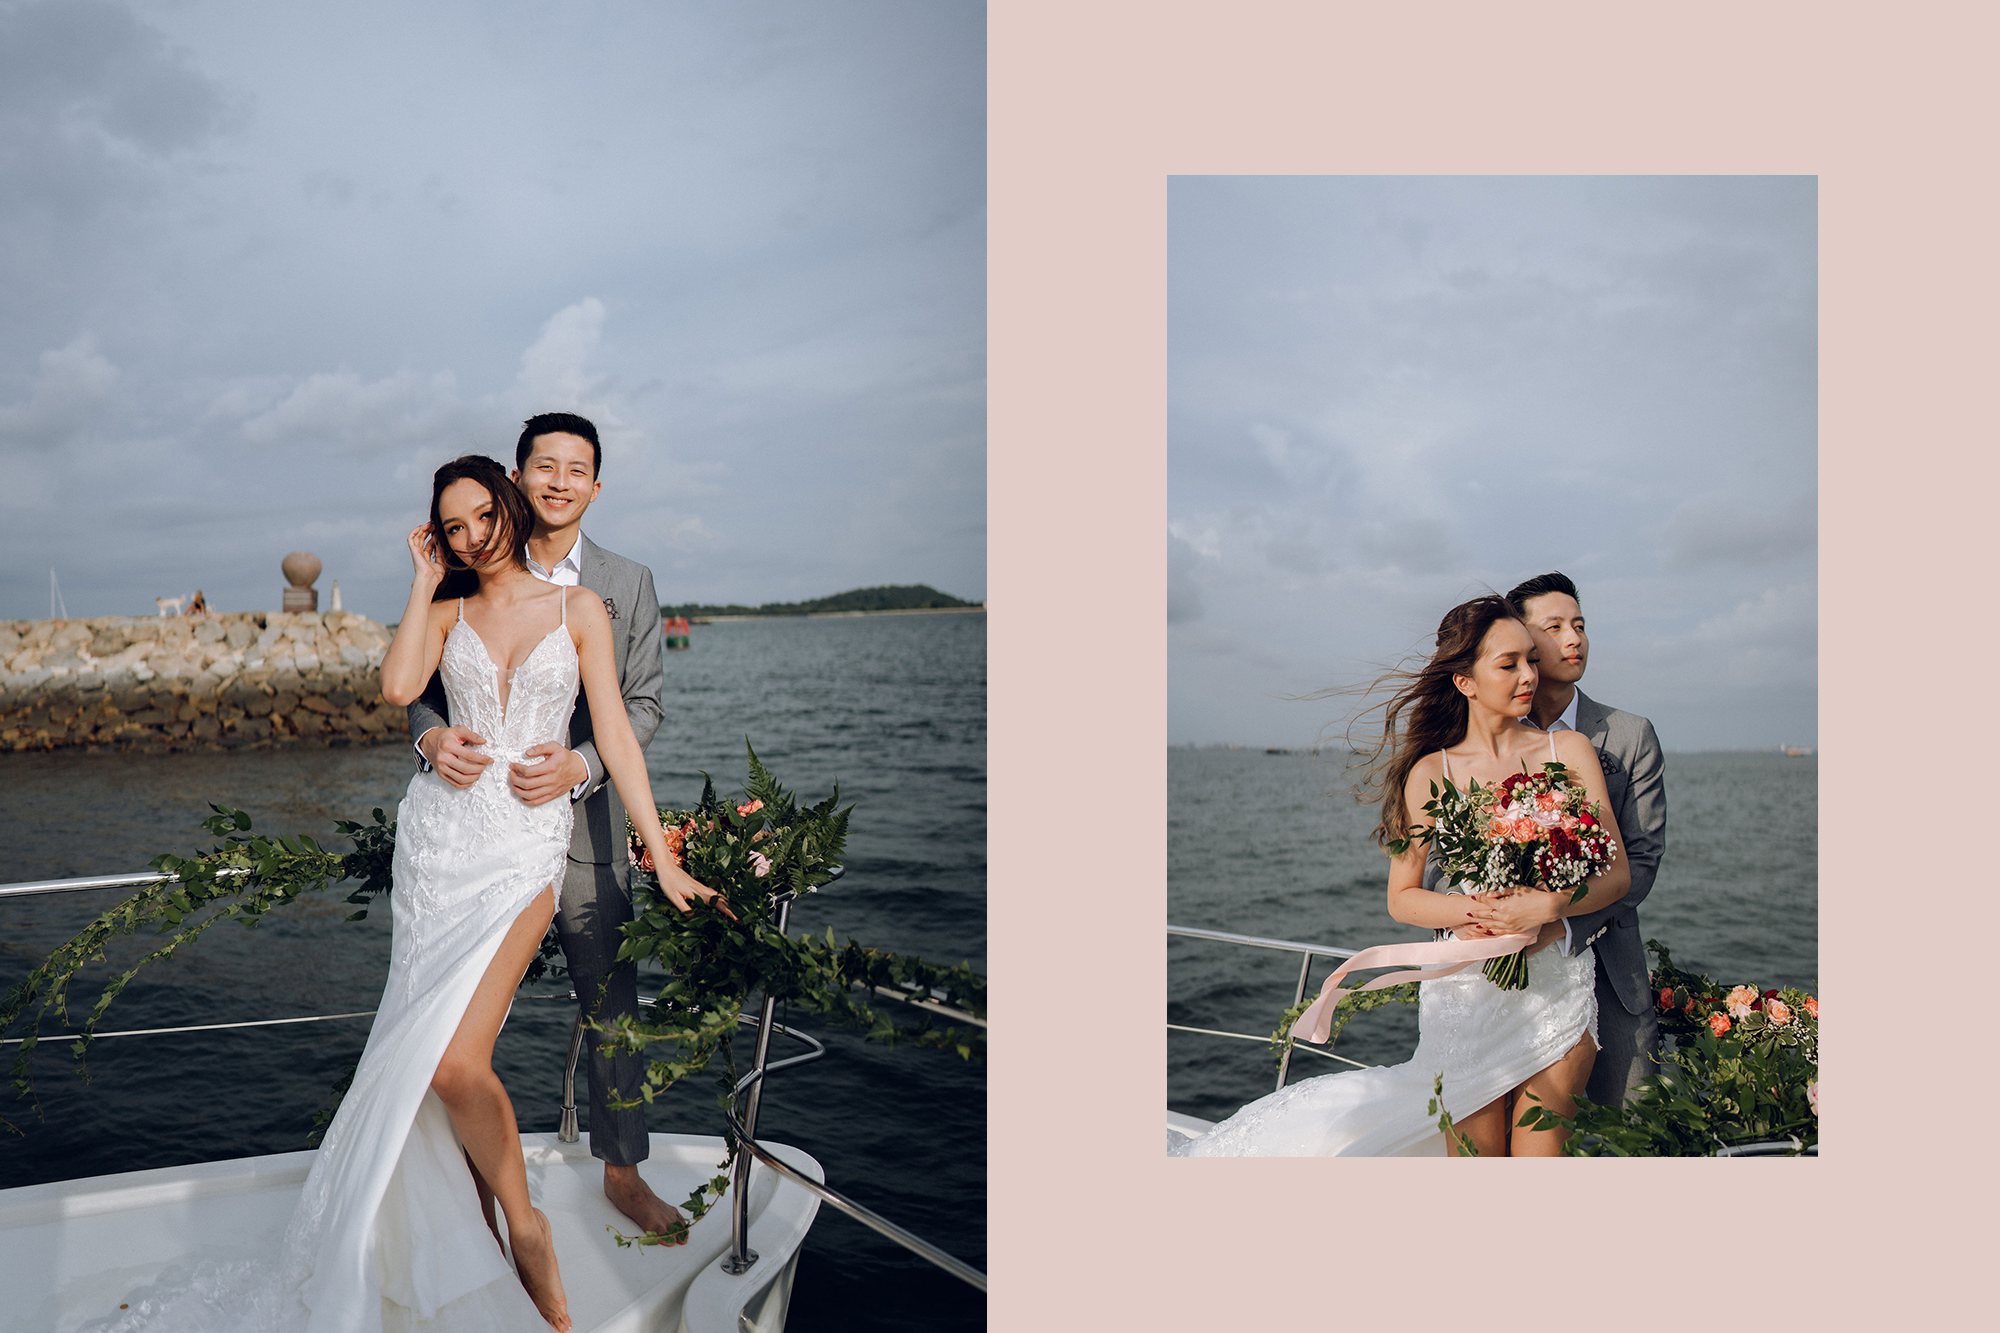 Sunset Prewedding Photoshoot On A Yacht With Romantic Floral Styling by Samantha on OneThreeOneFour 13